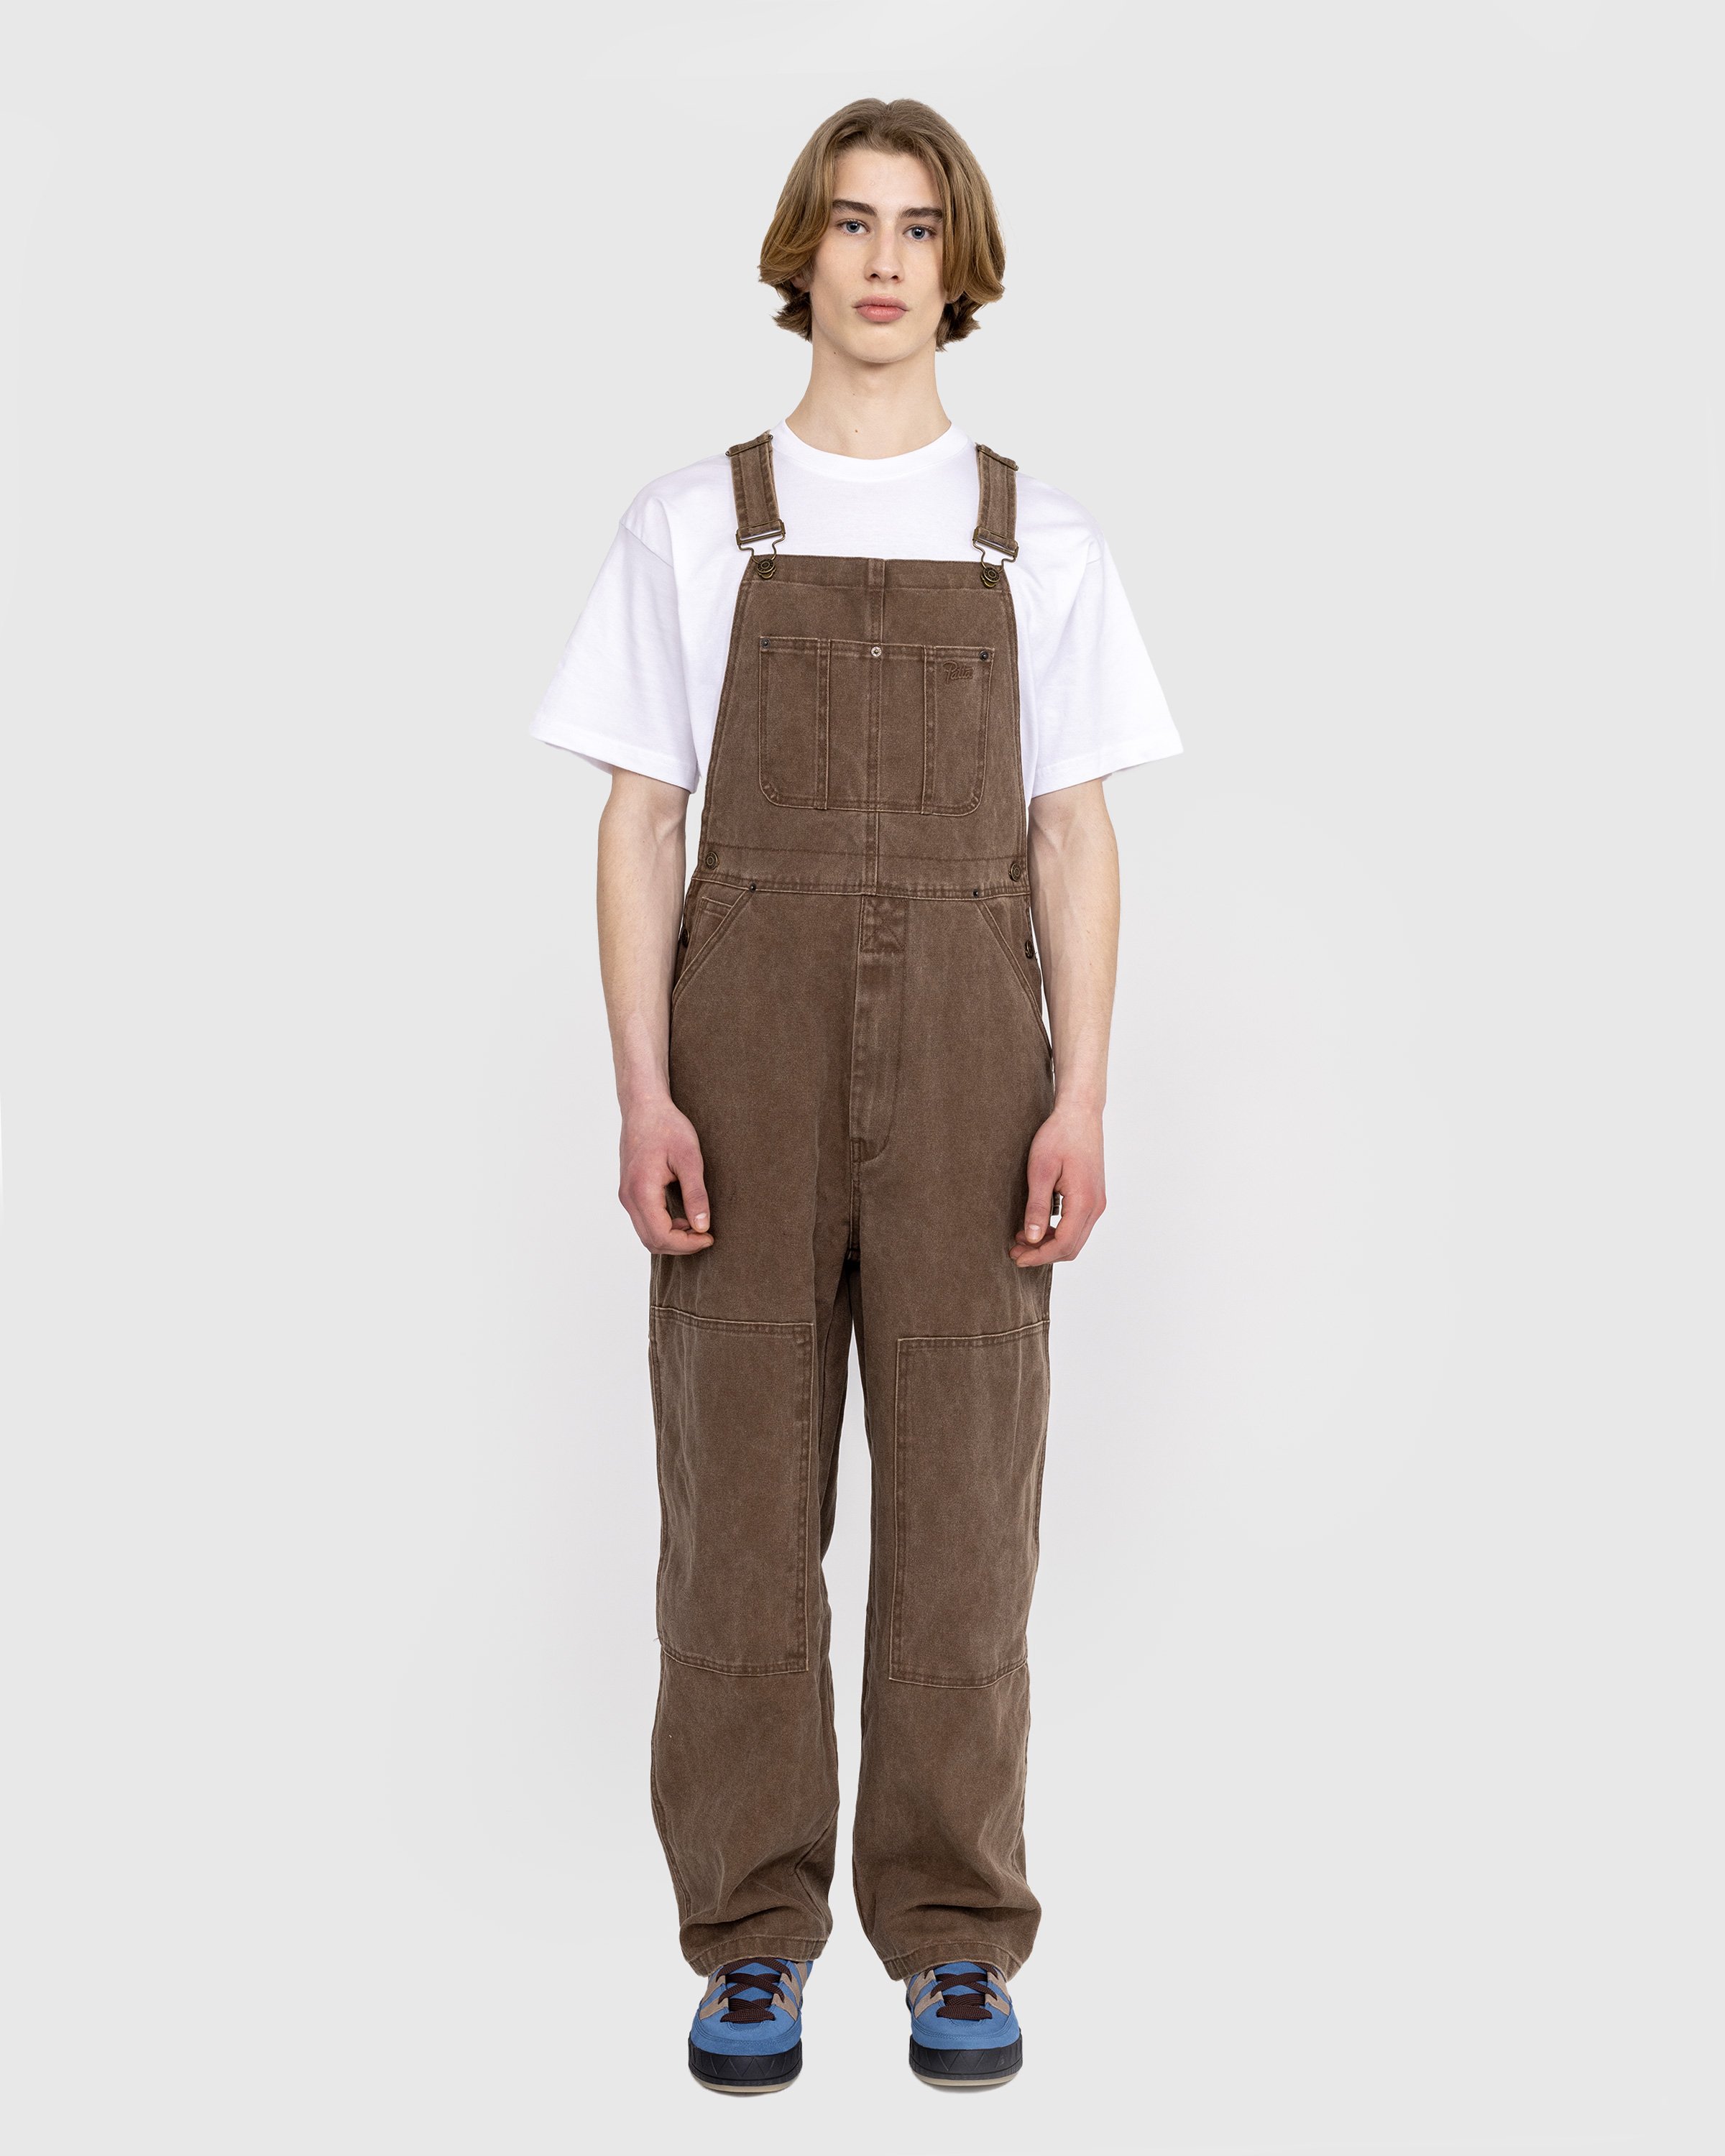 Patta - Canvas Overalls - Clothing - Brown - Image 2